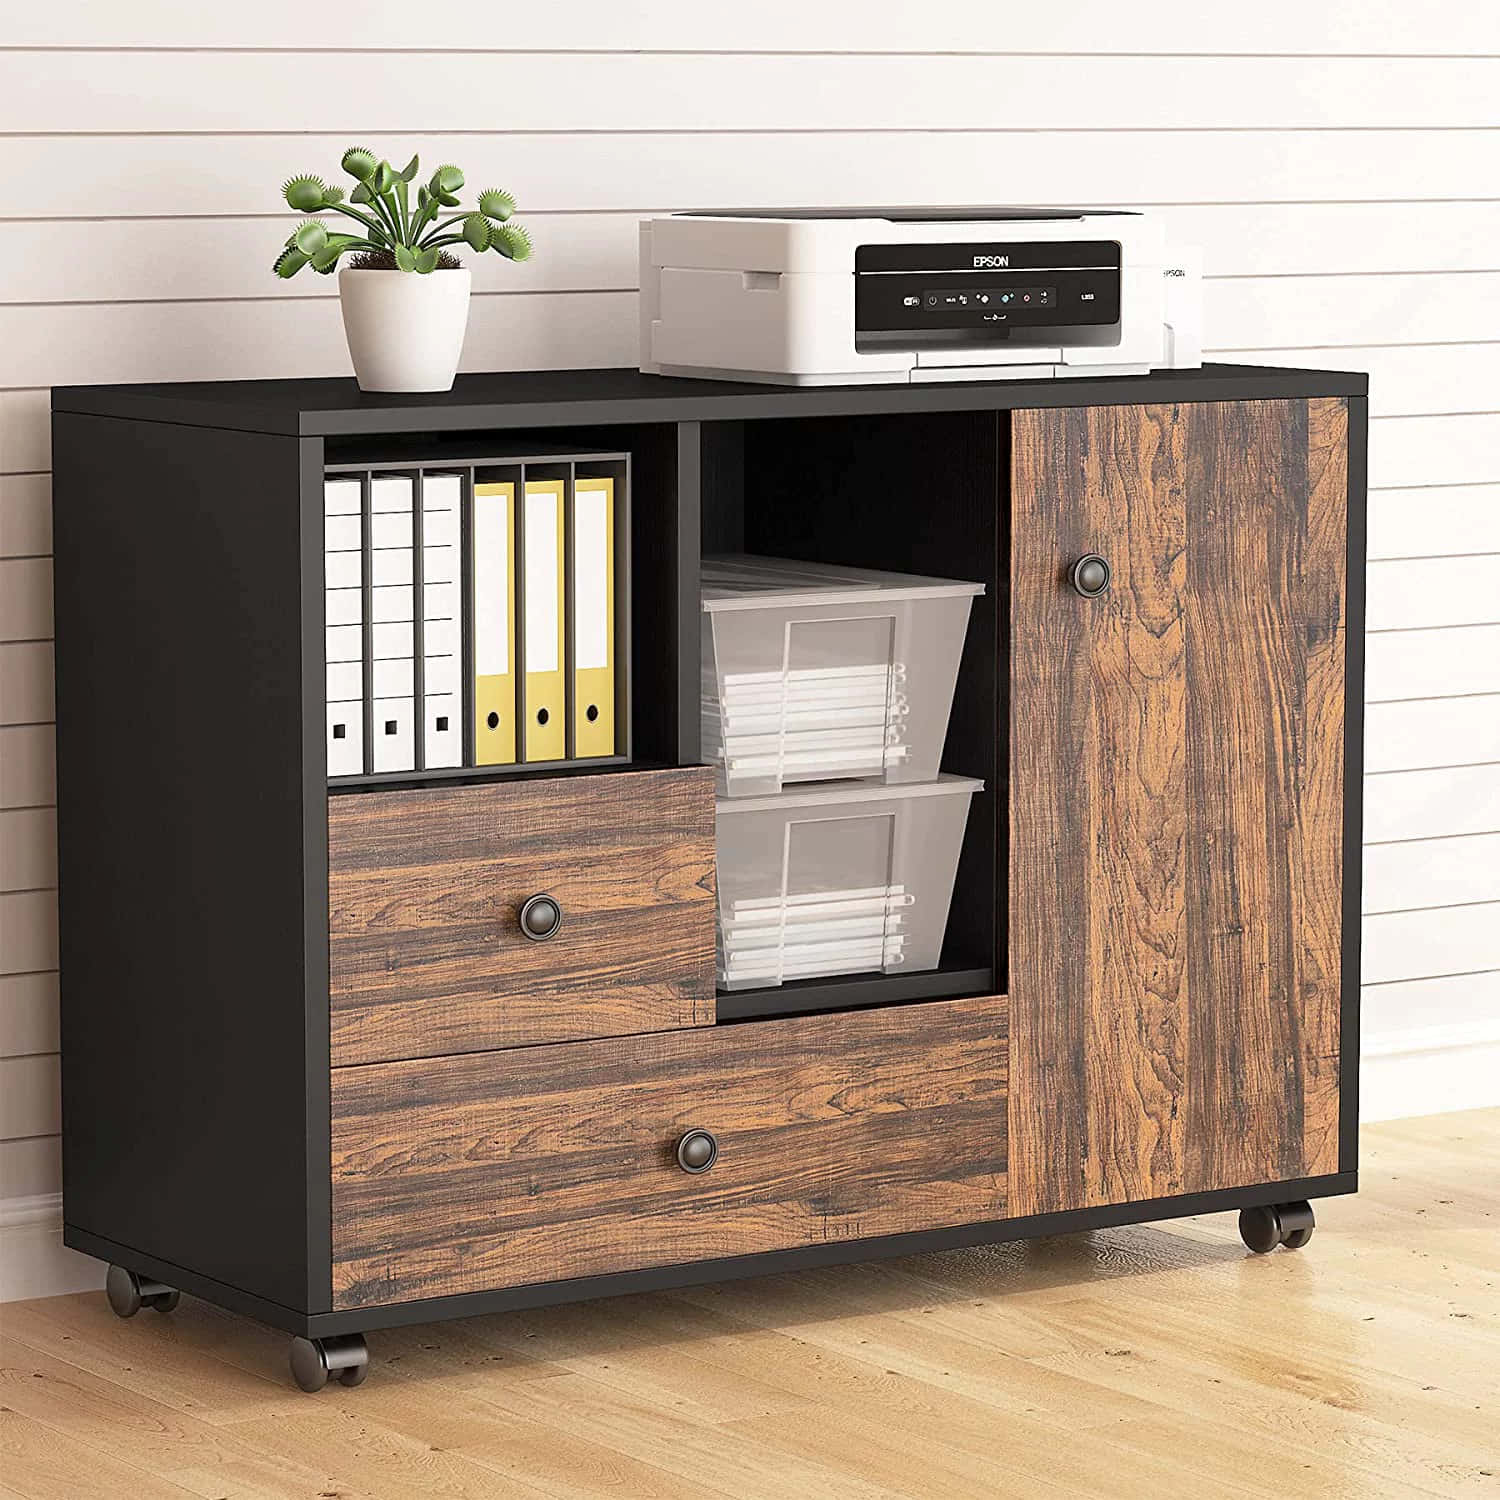 A Black And Brown Cabinet With A Printer And Drawers